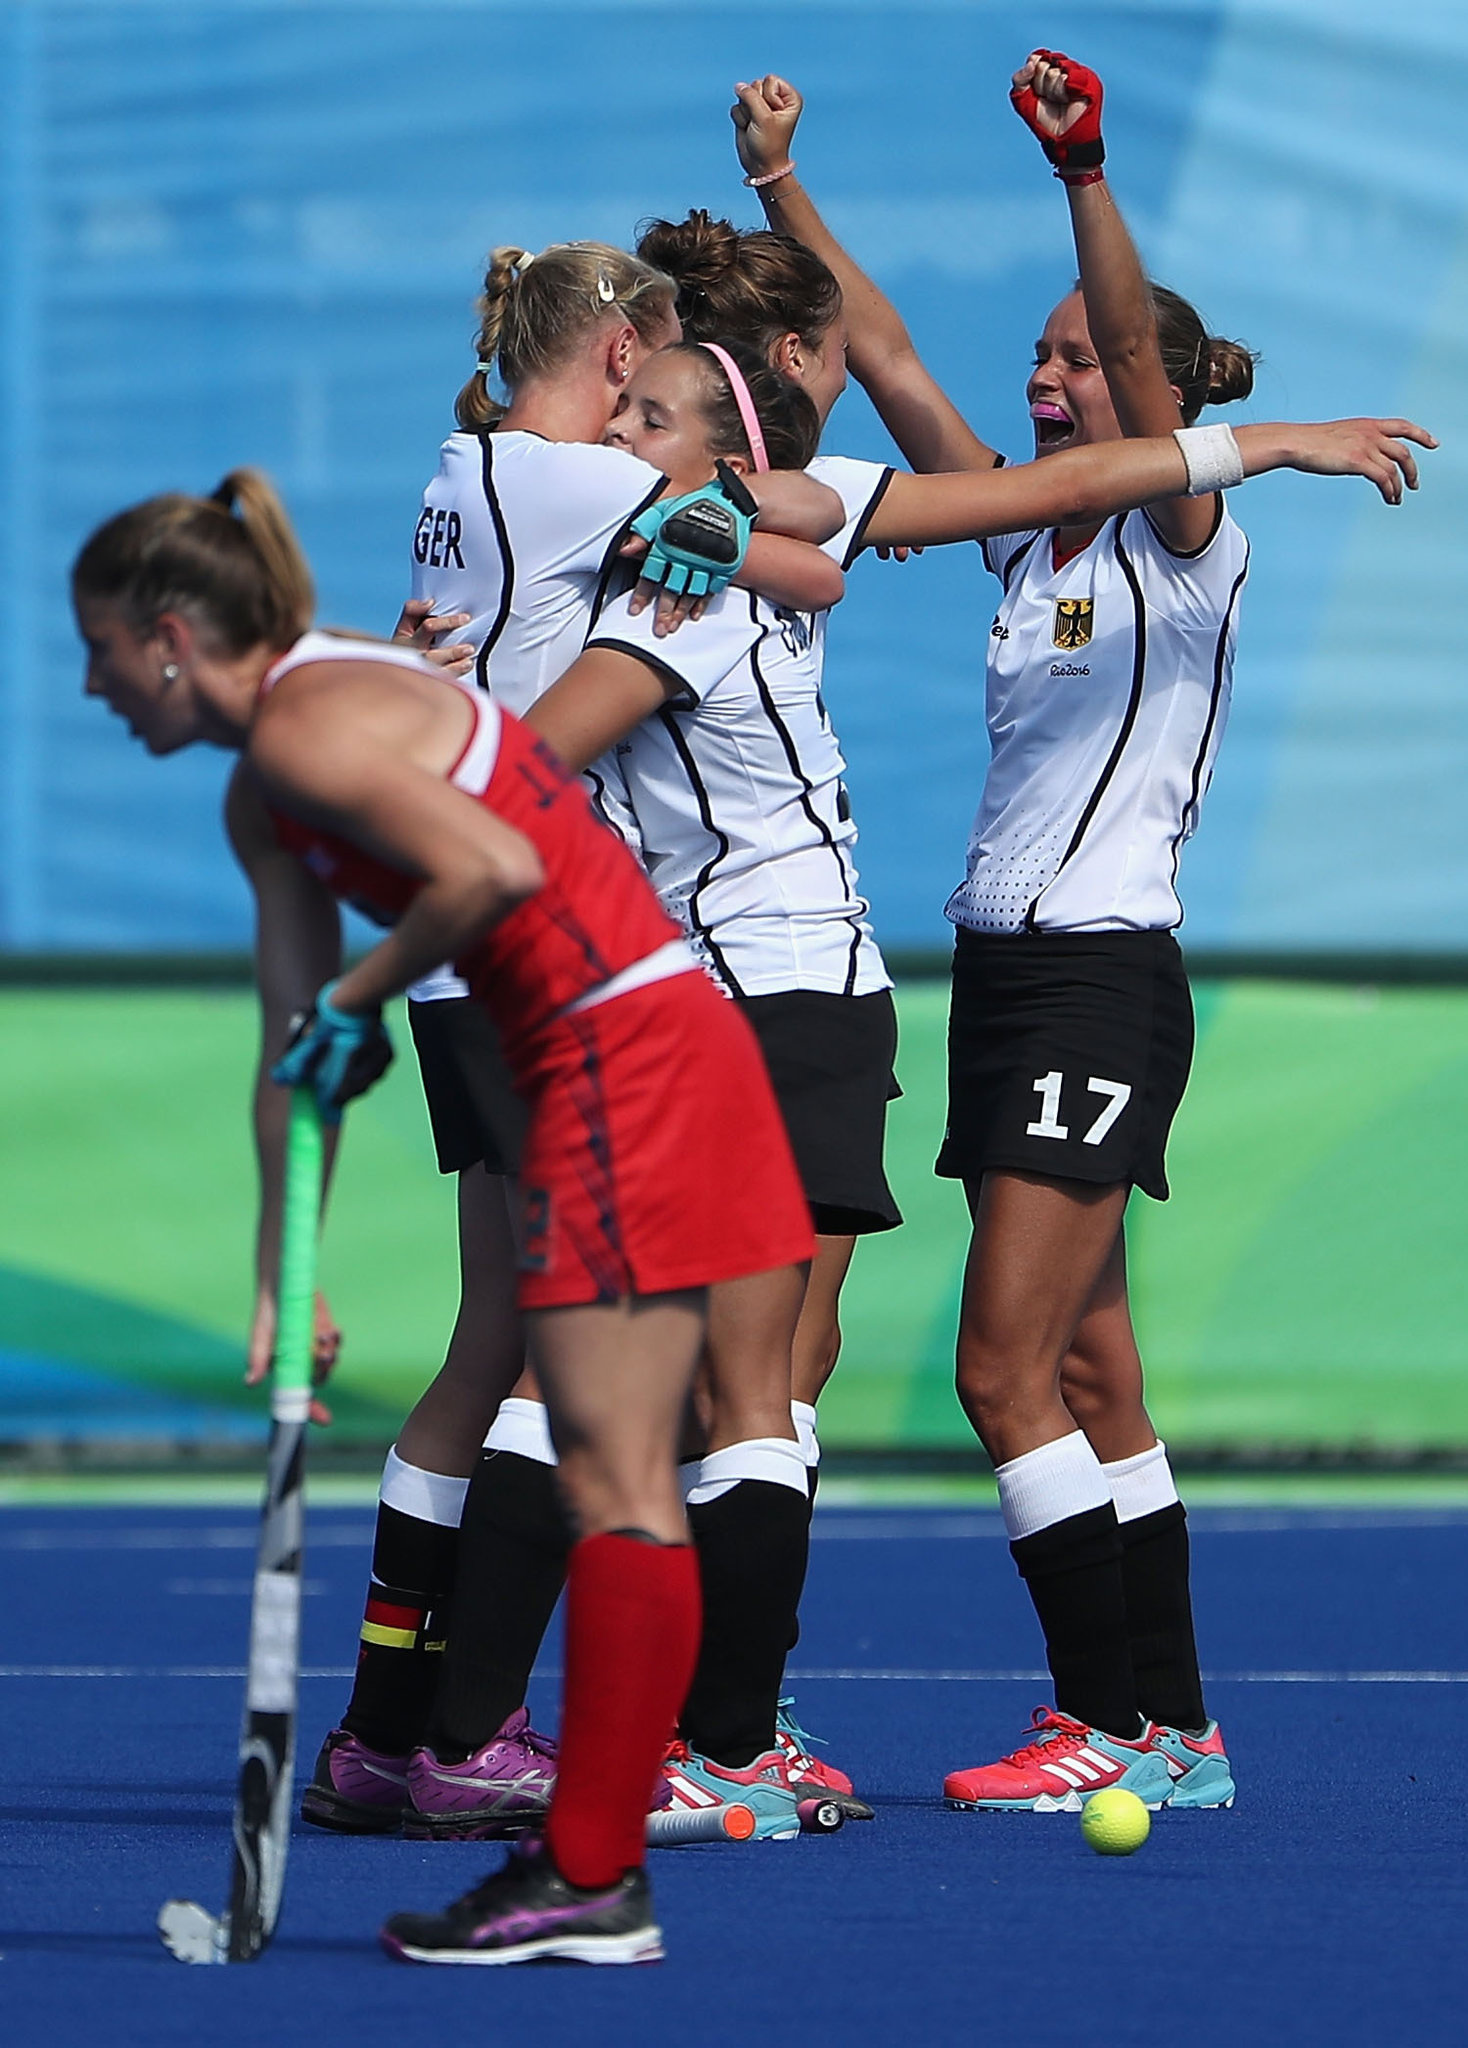 Field Hockey: Jana Teschke of Germany celebrates with teammates after defeating the US at the Rio 2016 Olympic Games. 1470x2050 HD Background.